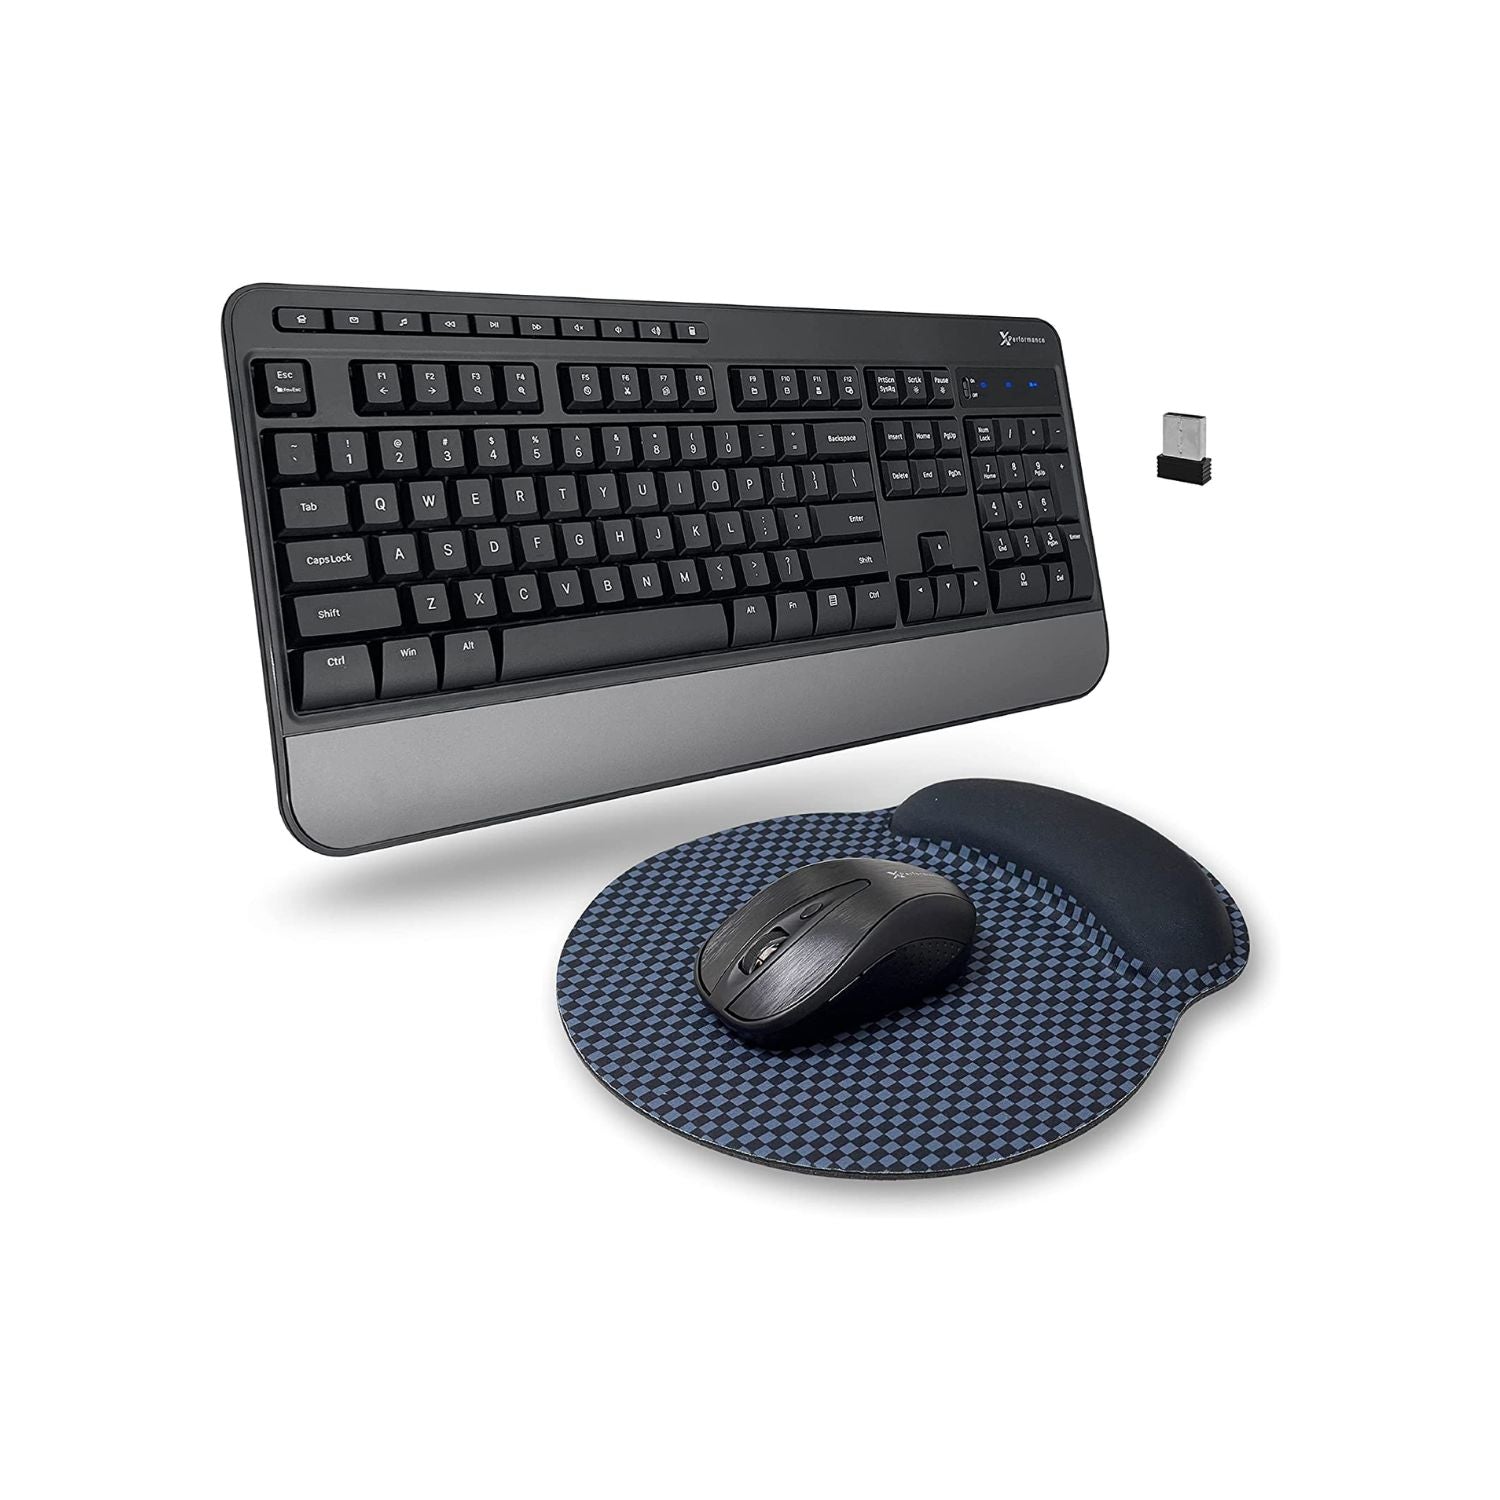 2.4G Wireless Mouse and Keyboard Combo - 3 in 1 Workflow Trio - Ke – X9 Performance